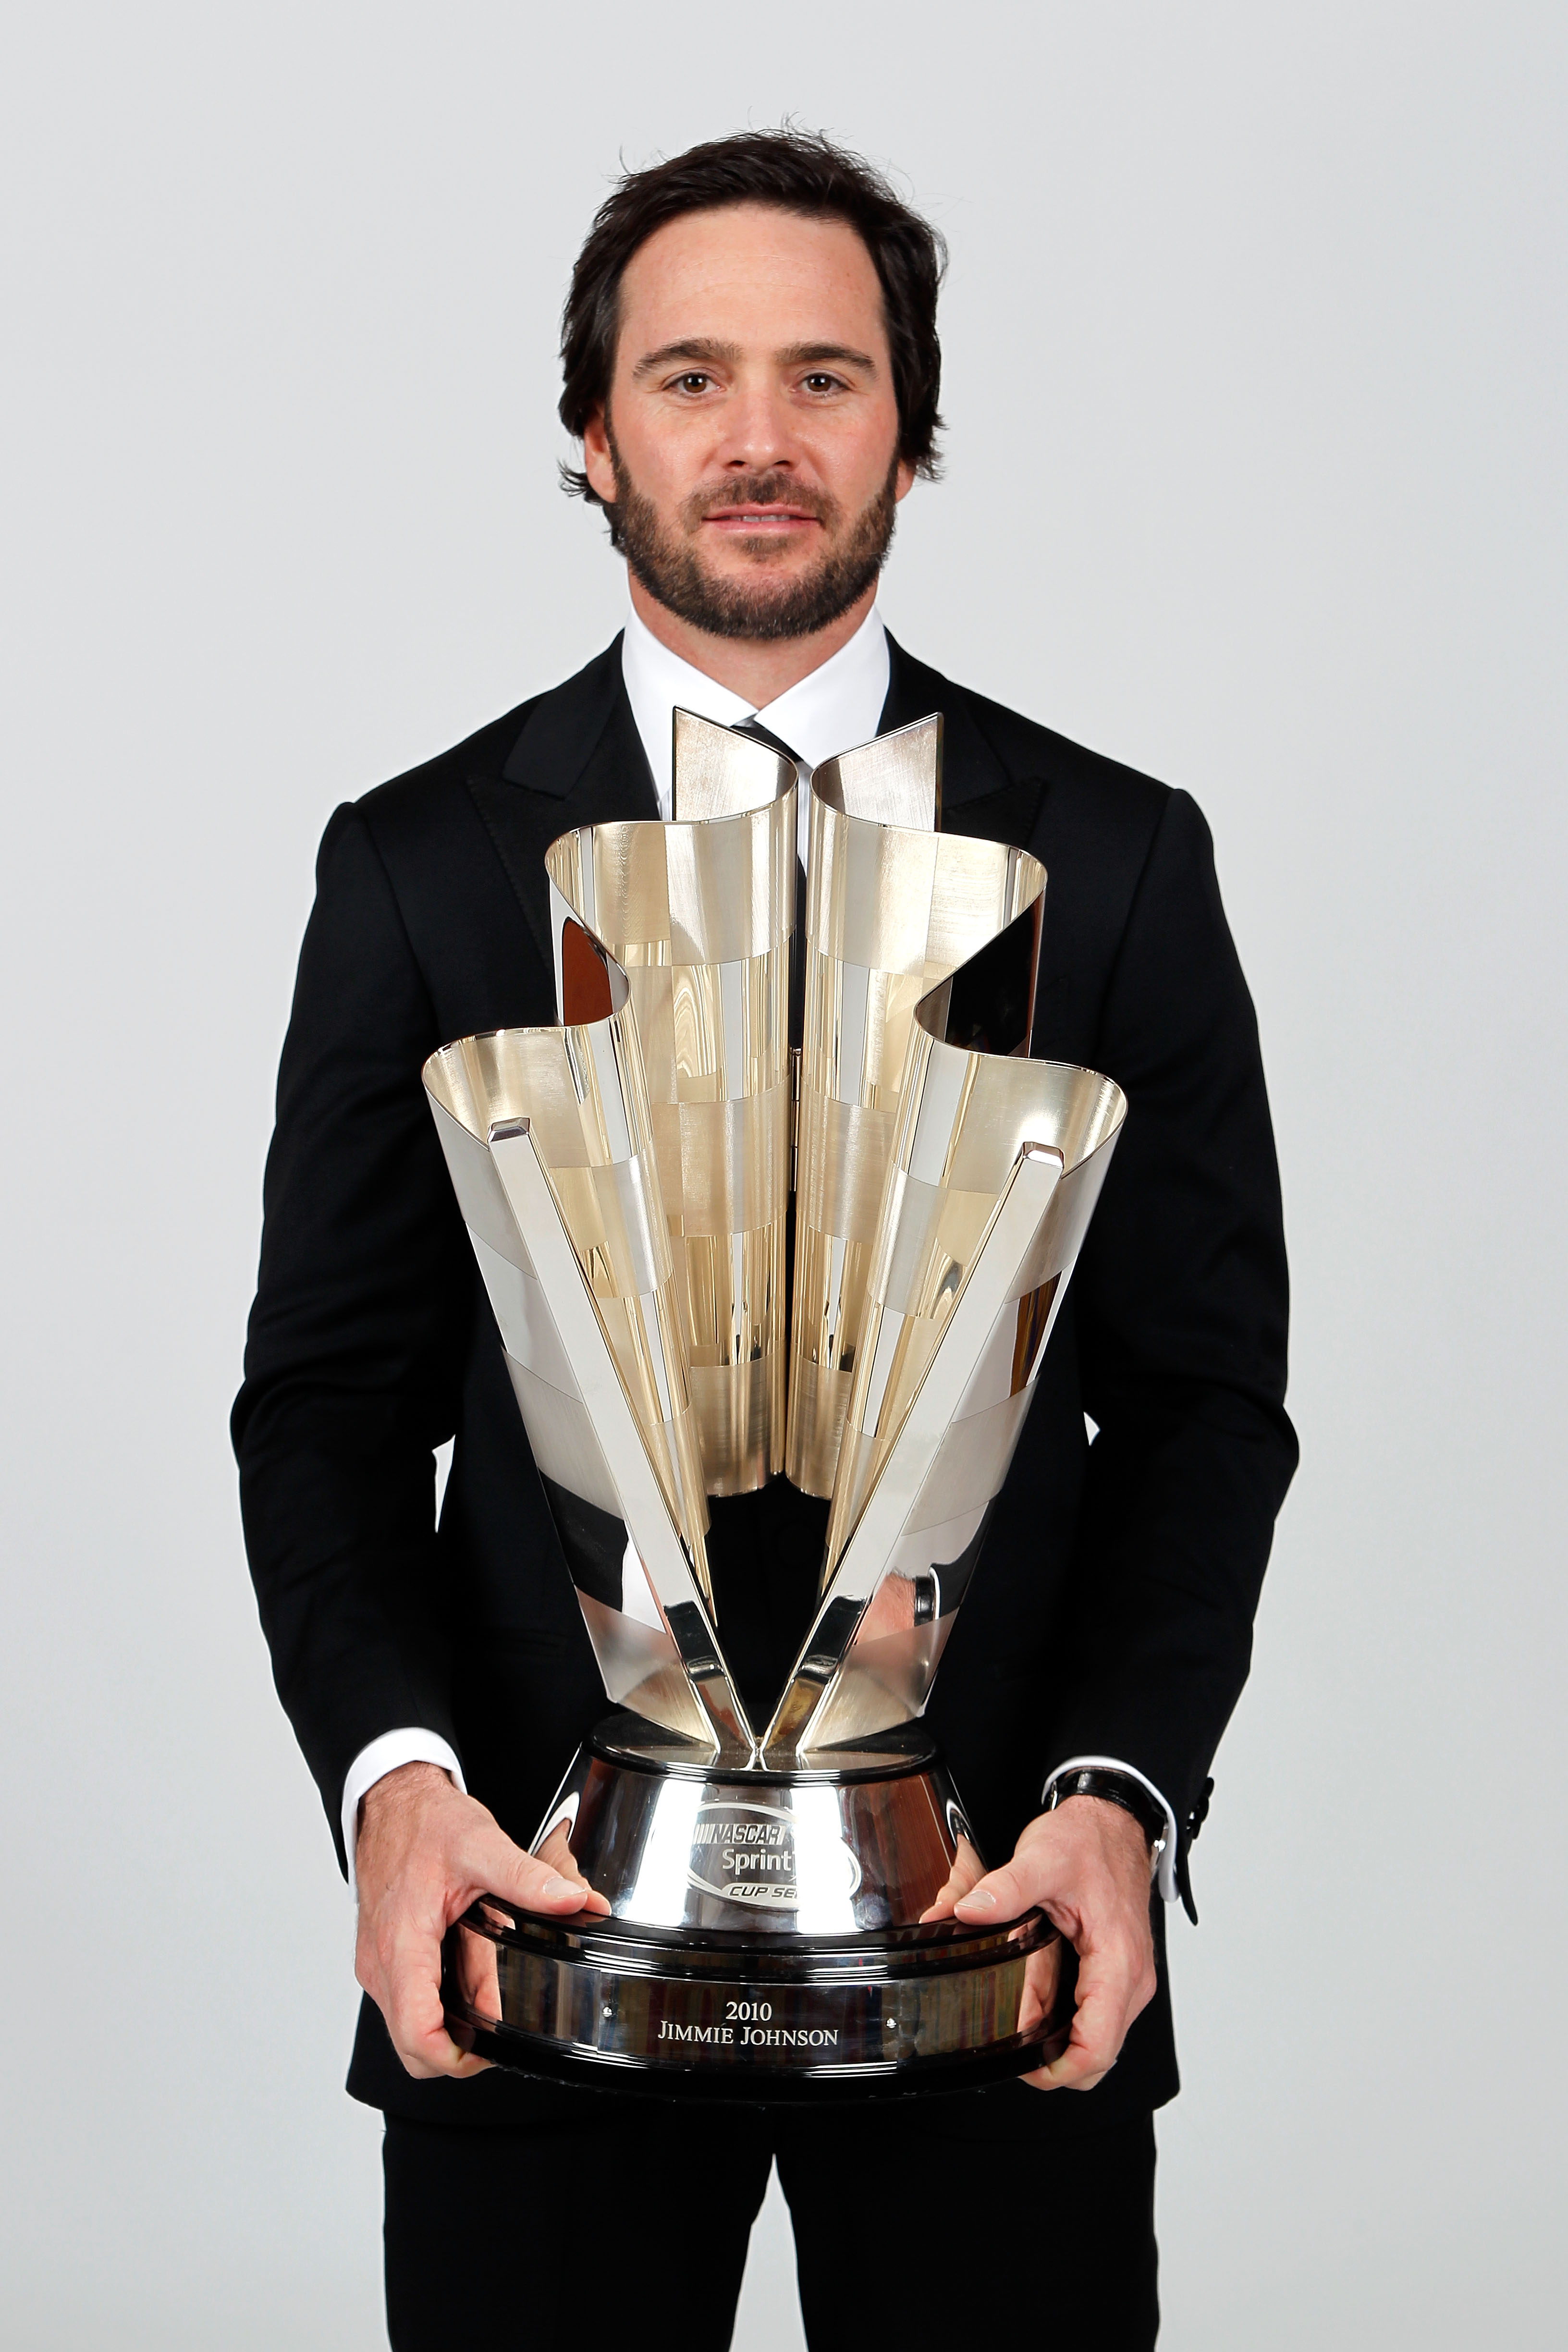 LAS VEGAS, NV - DECEMBER 03:  Five-time champion Jimmie Johnson poses with the Sprint Cup trophy during the NASCAR Sprint Cup Series awards banquet at the Wynn Las Vegas Hotel on December 3, 2010 in Las Vegas, Nevada.  (Photo by Todd Warshaw/Getty Images